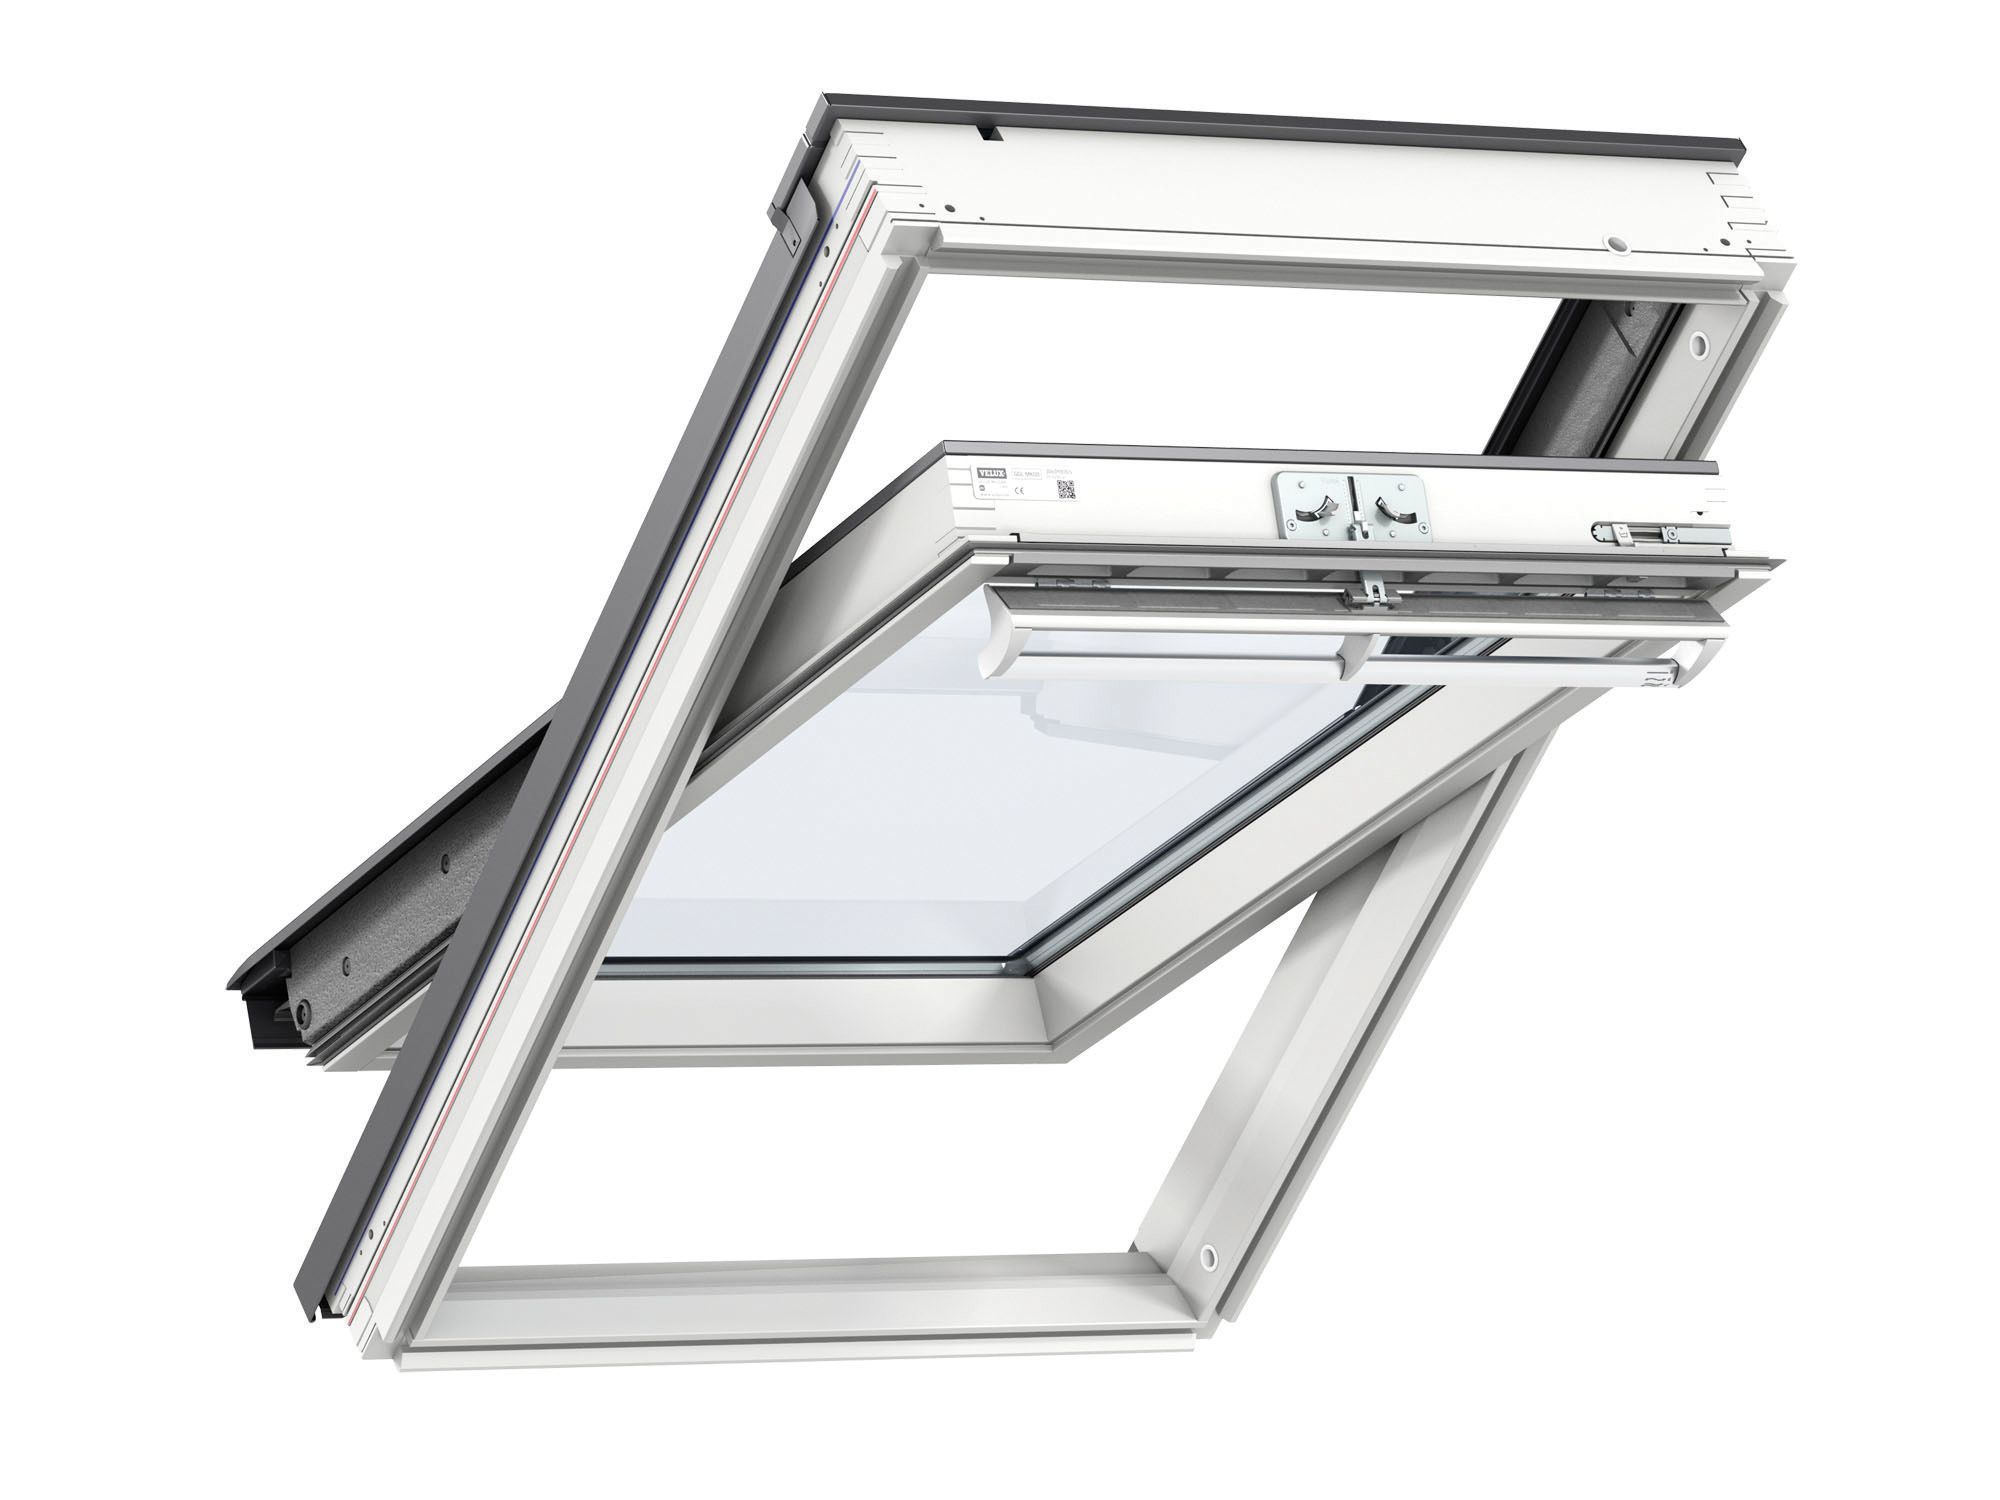 Image of VELUX GGL SK06 2070 White Painted Centre Pivot Roof Window - 1140 x 1180mm